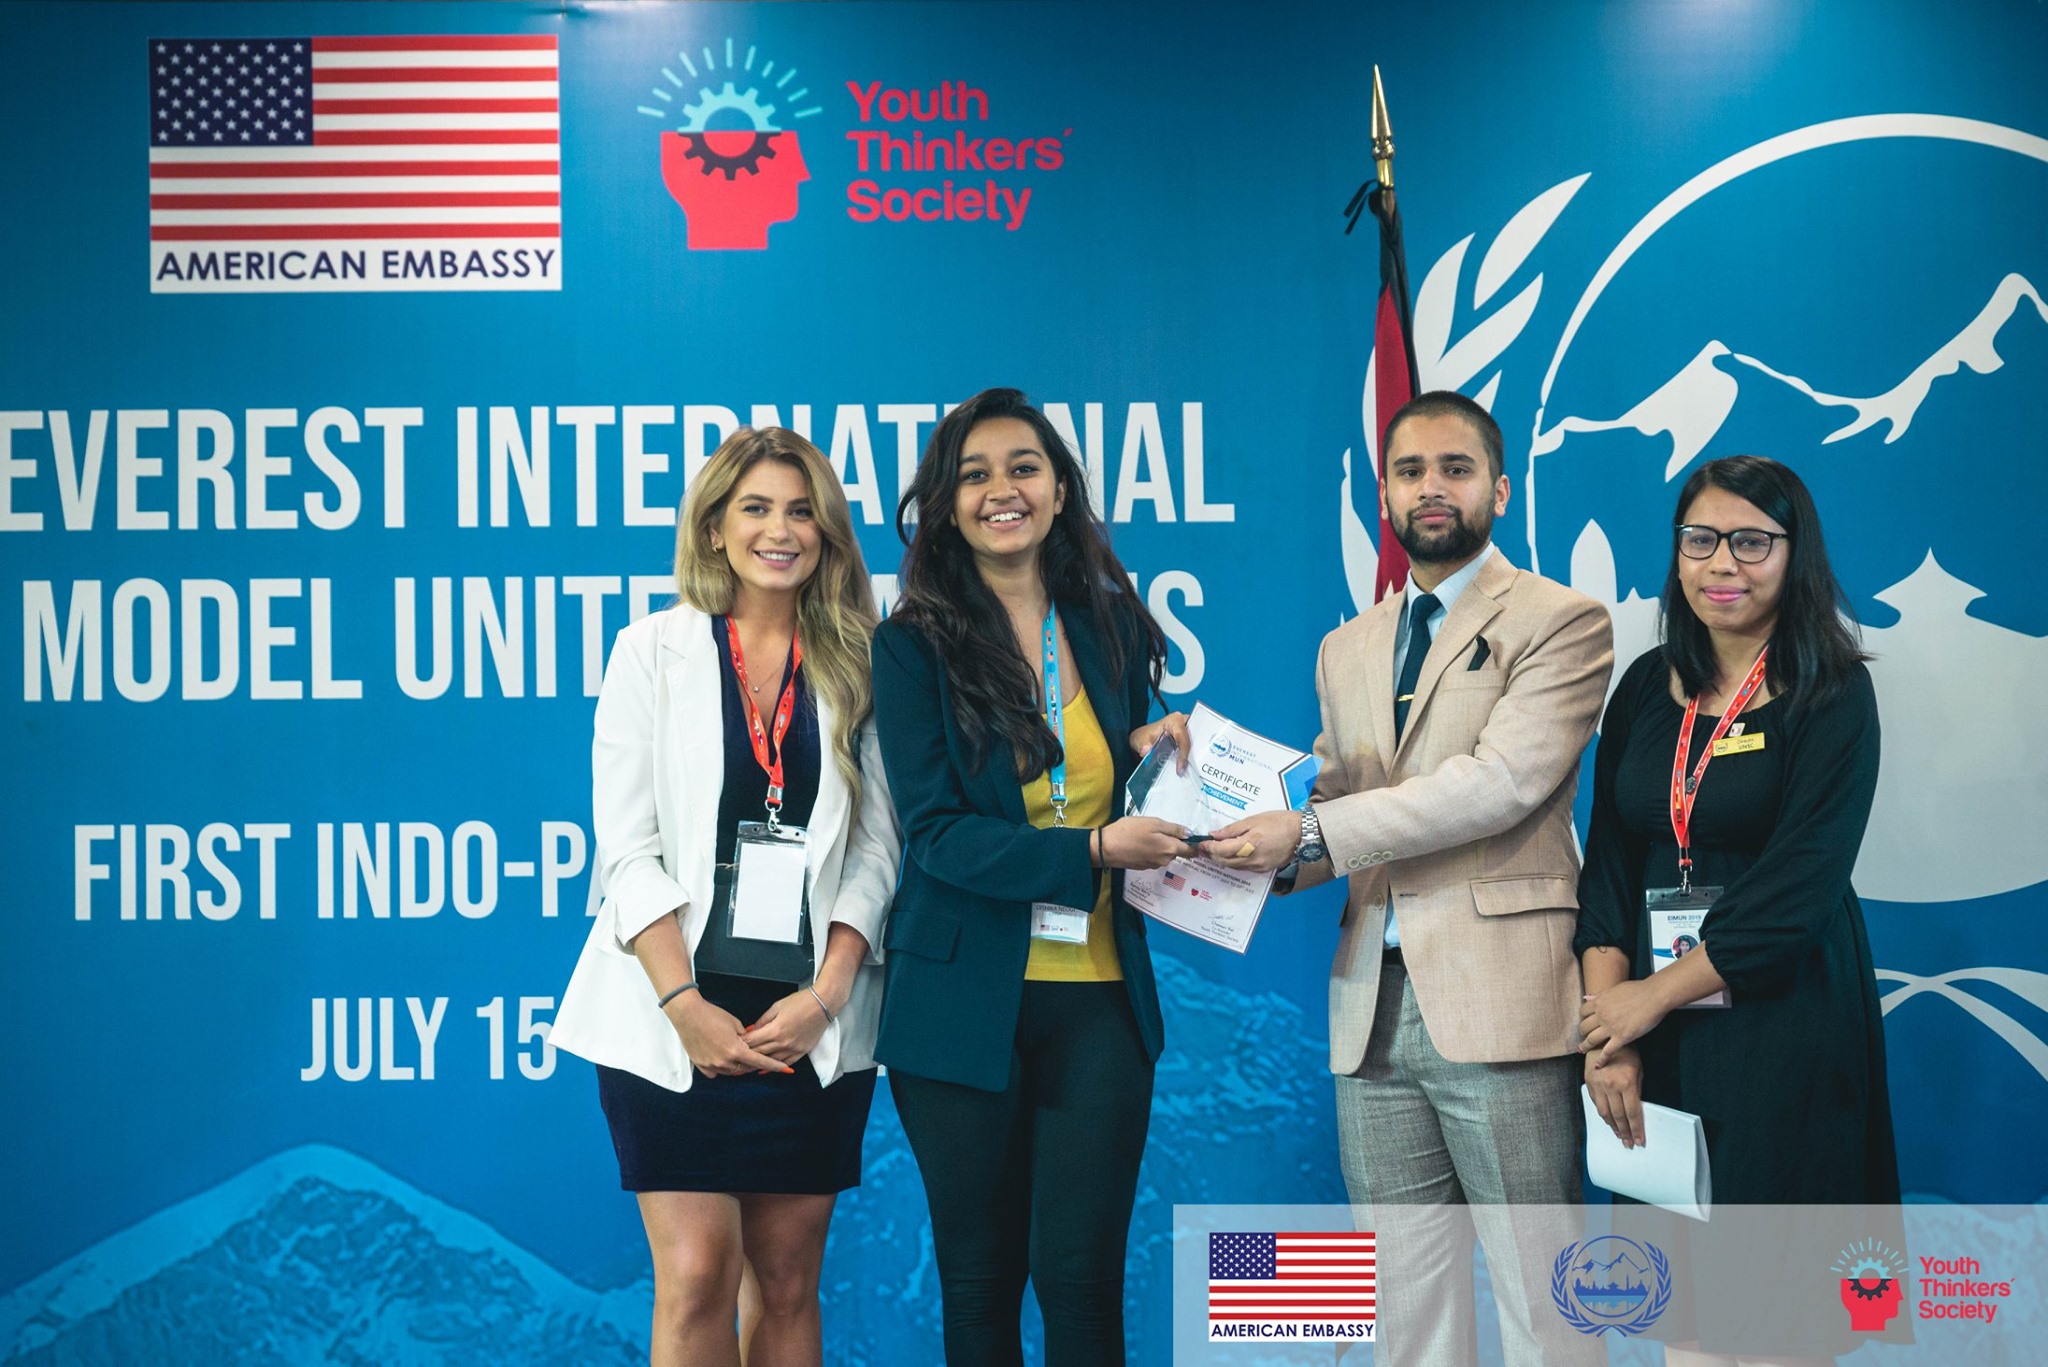 Recalling back to EIMUN 2019 – A must event to attend for youth